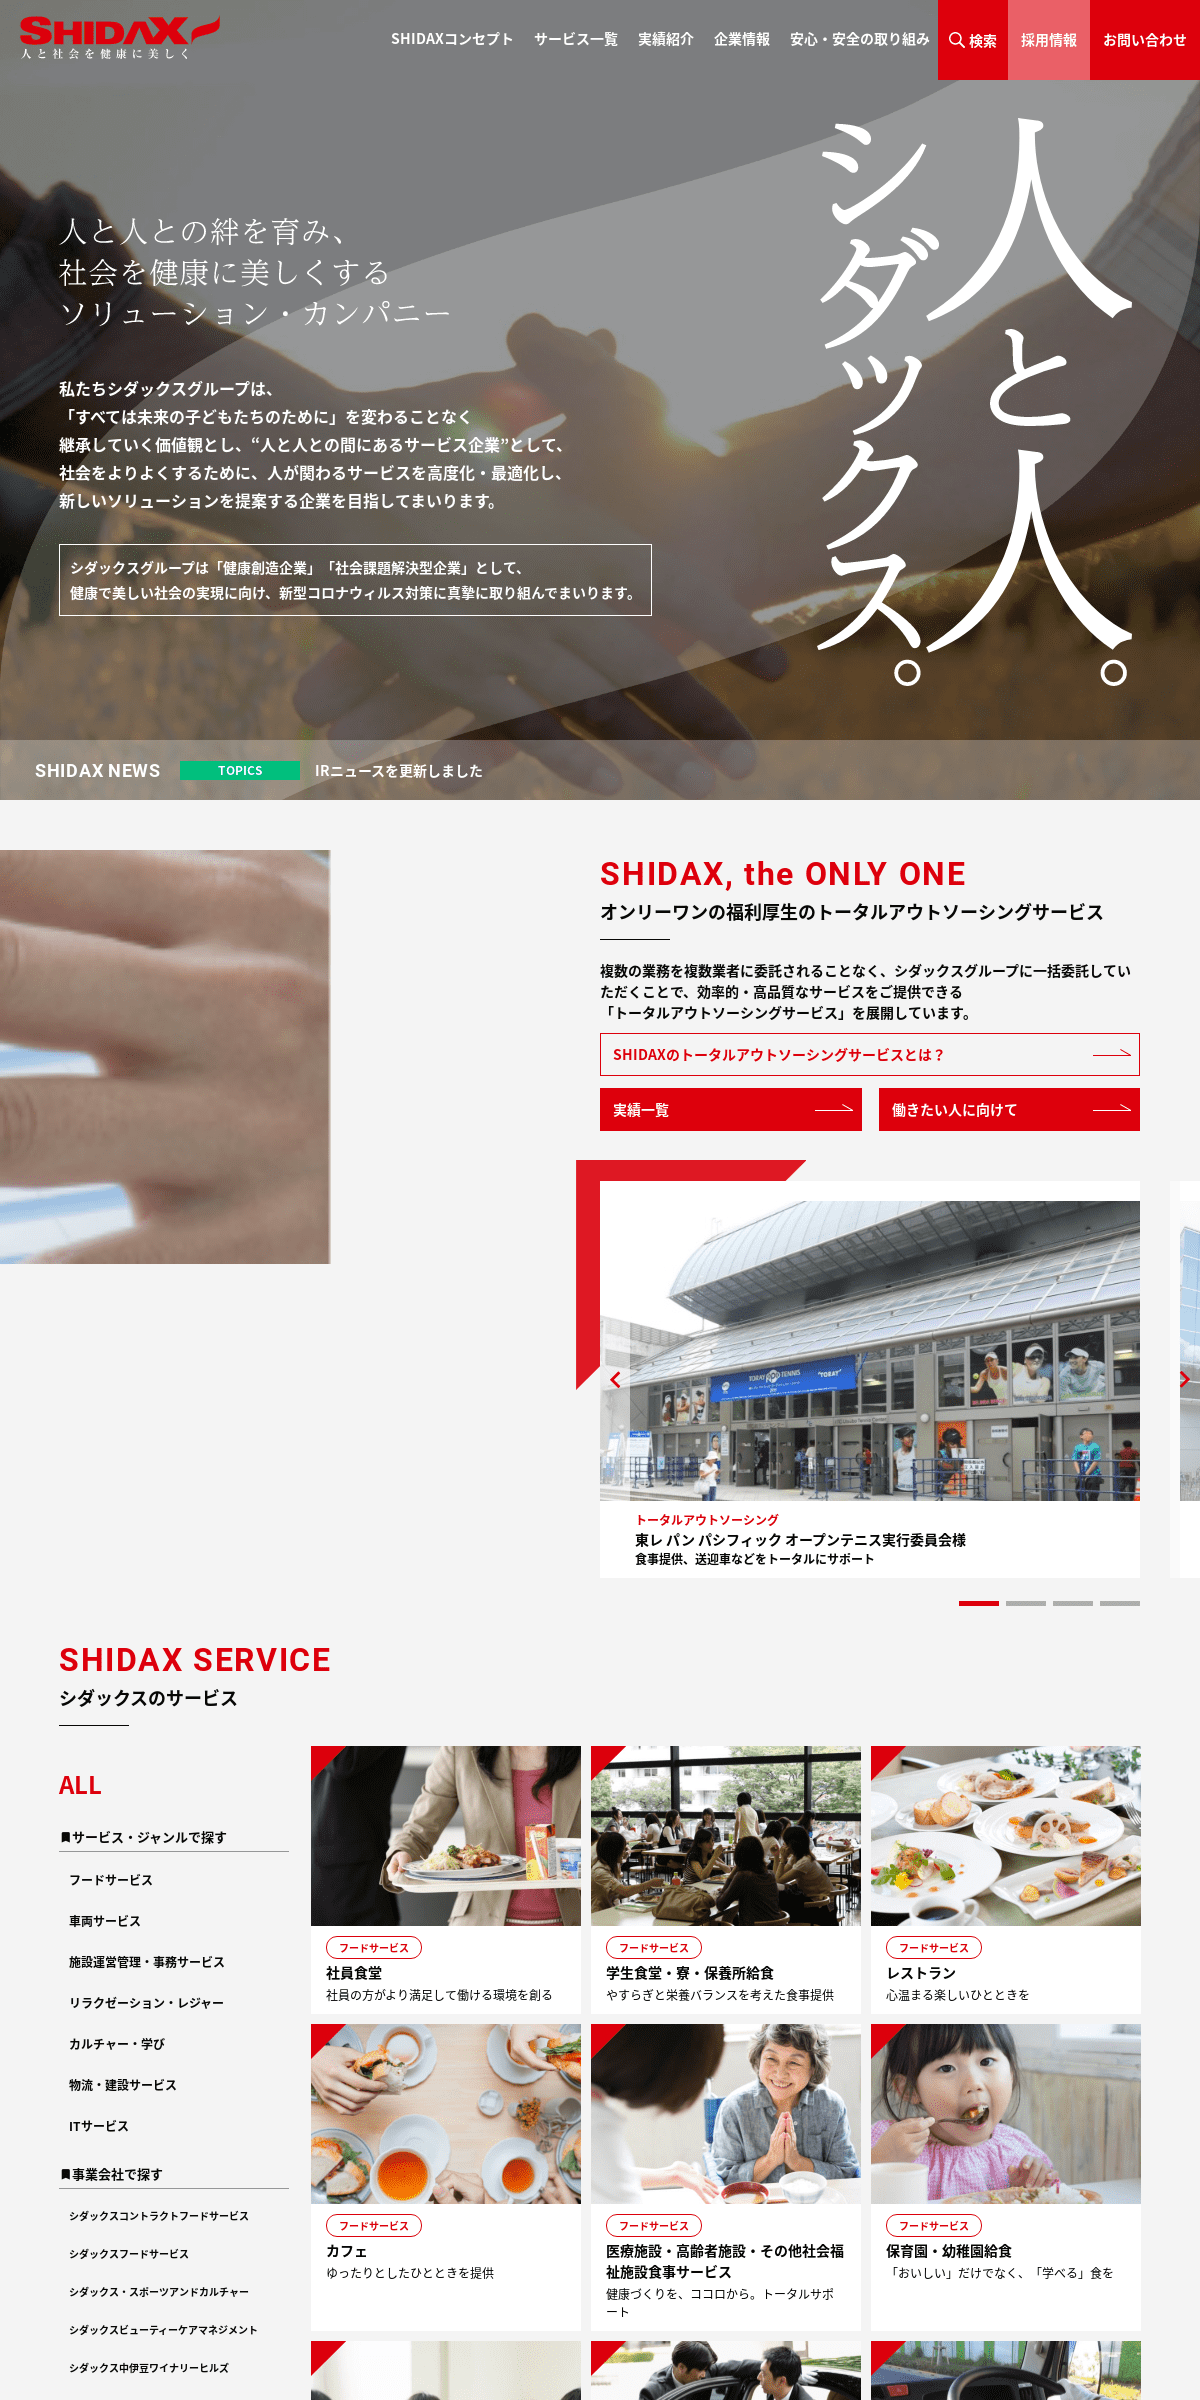 A complete backup of shidax.co.jp